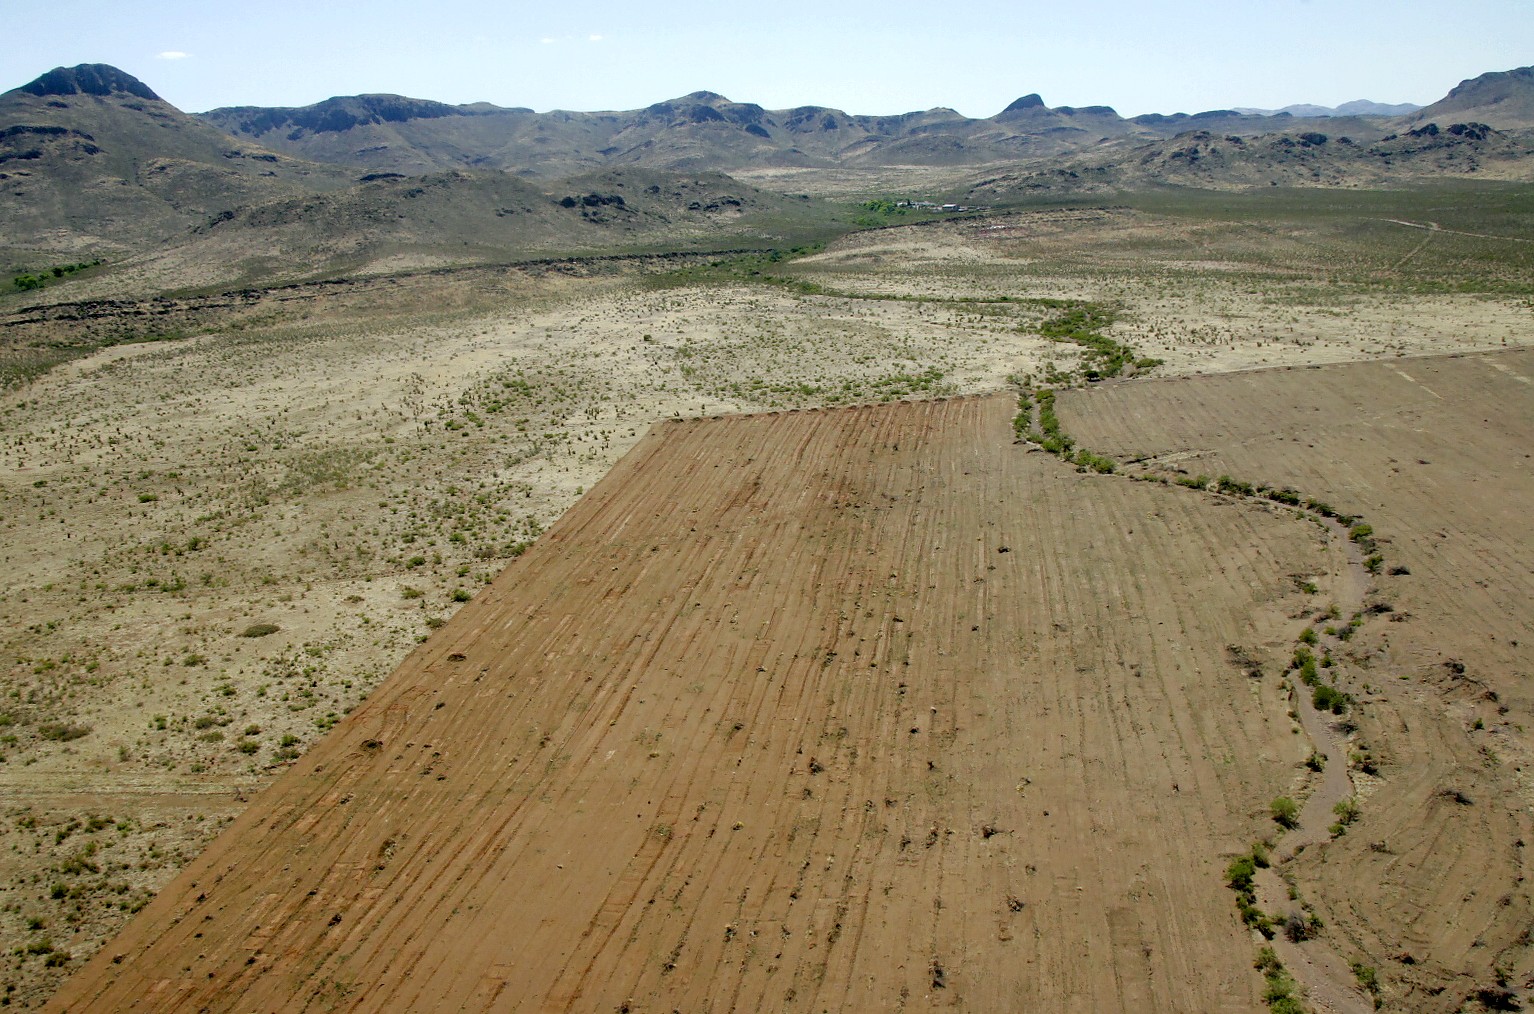 This aerial image shows the striking contrast between cleared crop fields and healthy grassland habitat. Photo by Ken Stinnet.